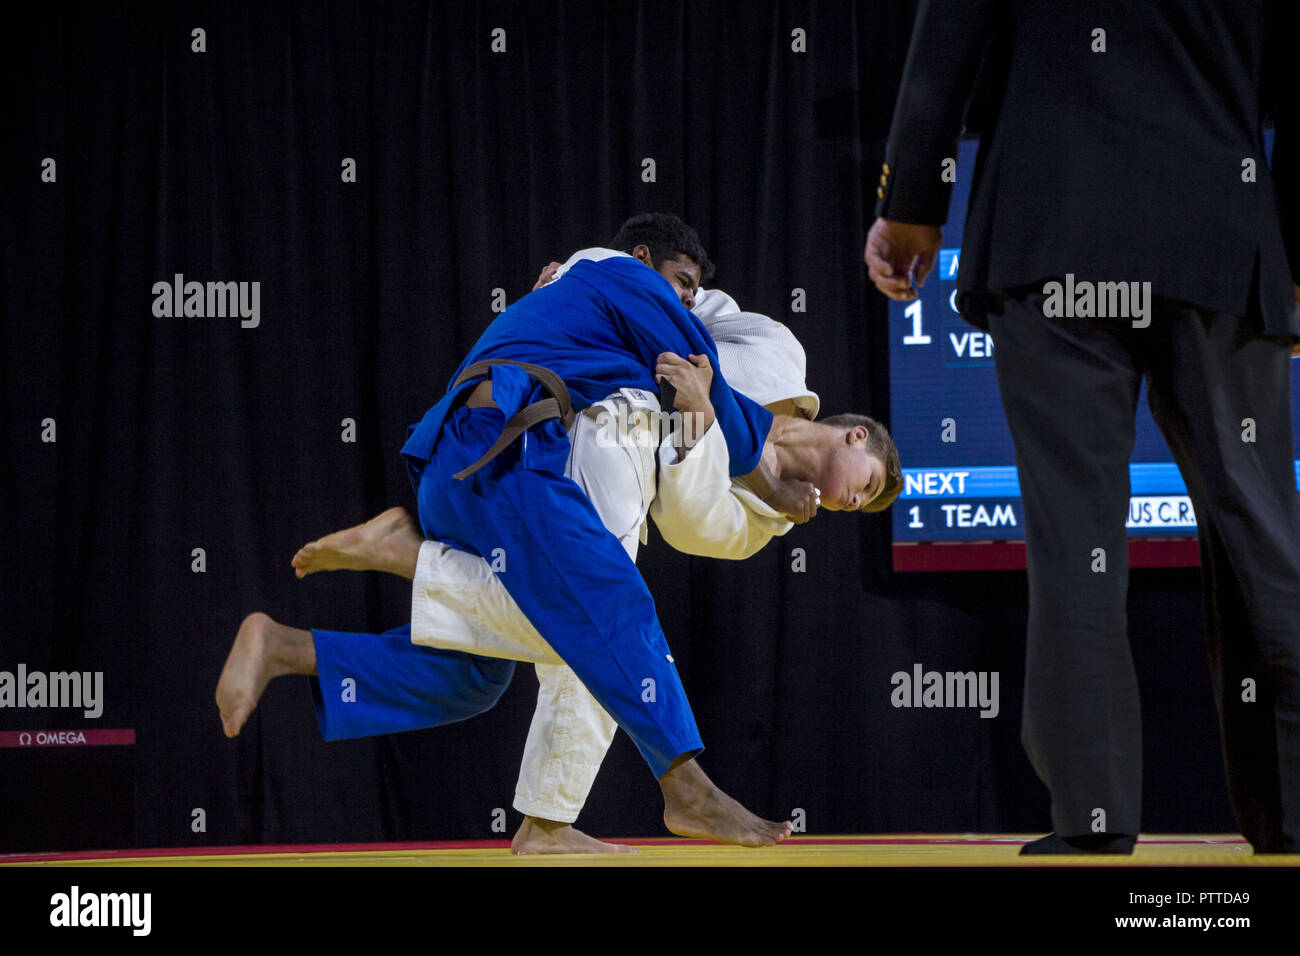 Buenos Aires, Buenos Aires, Argentina. 10th Oct, 2018. Finals of mixed teams of international judo. The Venezuelan Paez Calos (Blue), member of the team Beijing, winner of the gold medal, faces the Athens team fighter, winner of the silver medal, the Czech Bezdek Martin Credit: Roberto Almeida Aveledo/ZUMA Wire/Alamy Live News Stock Photo